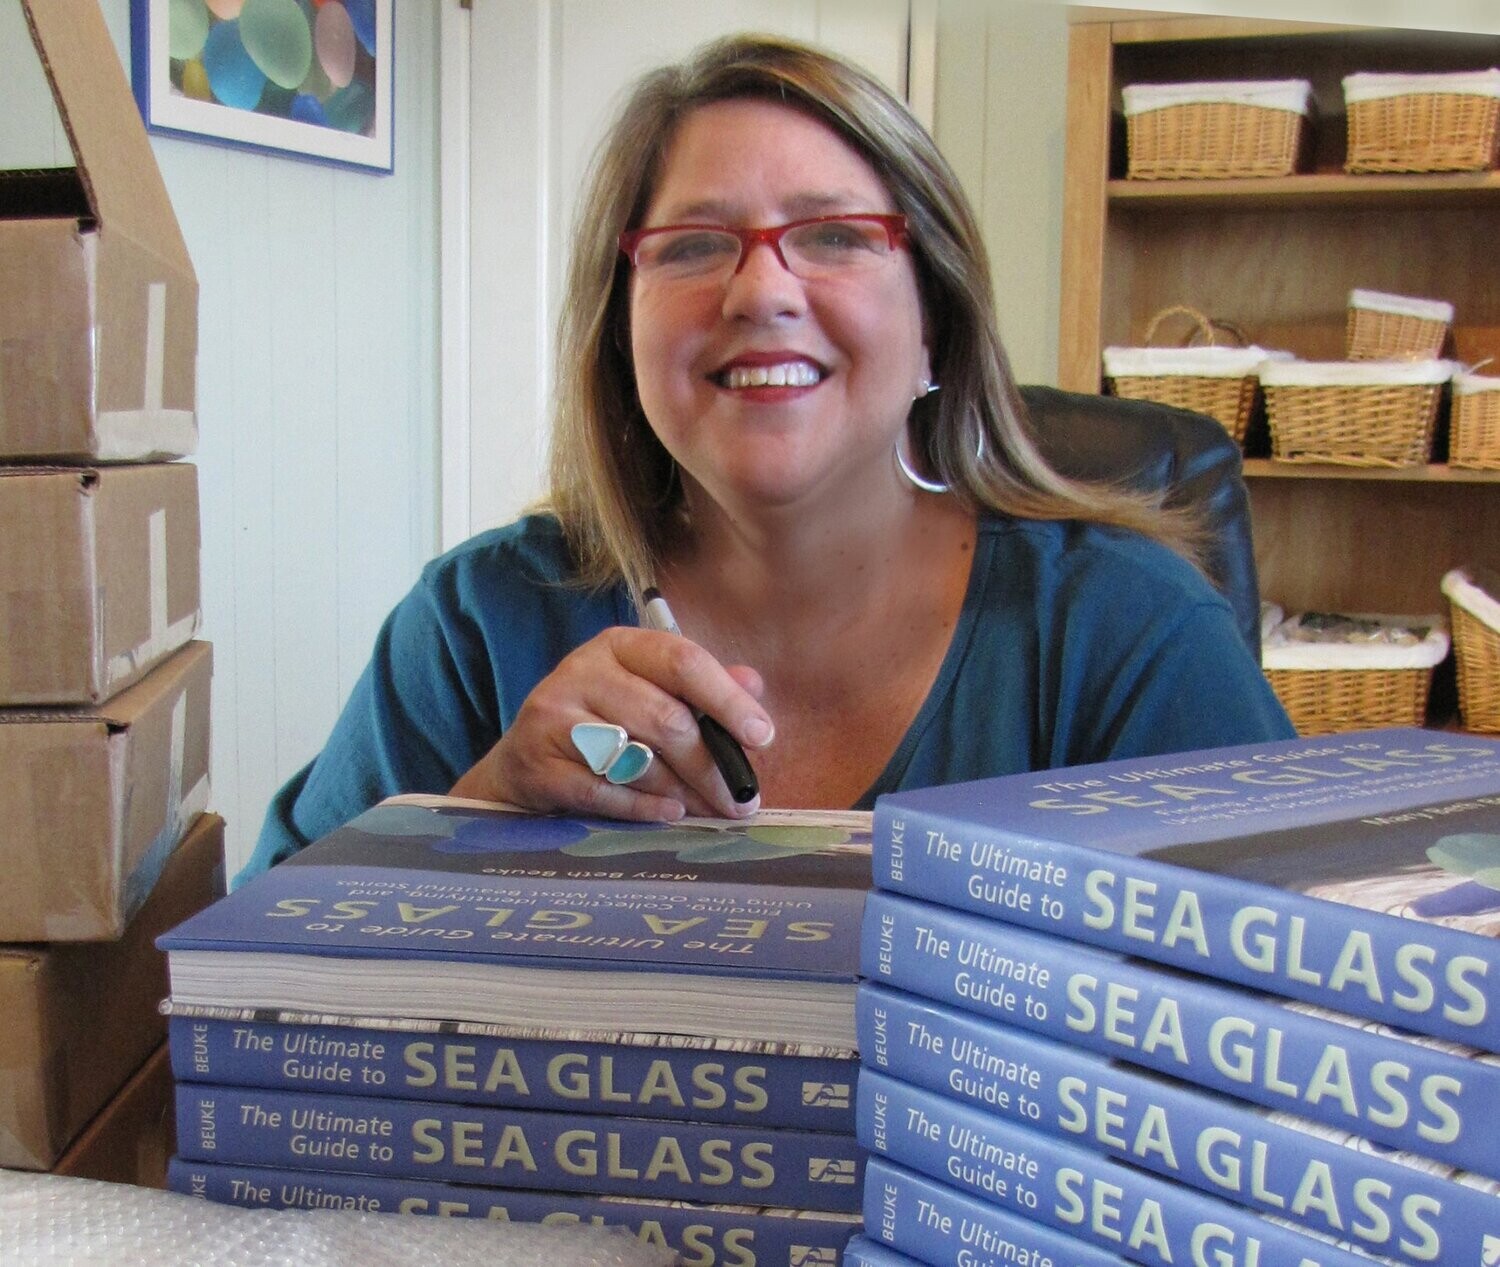 Signed, Hardback, "coffee table version."
"Ultimate Guide to Sea Glass" - 5 Stars!